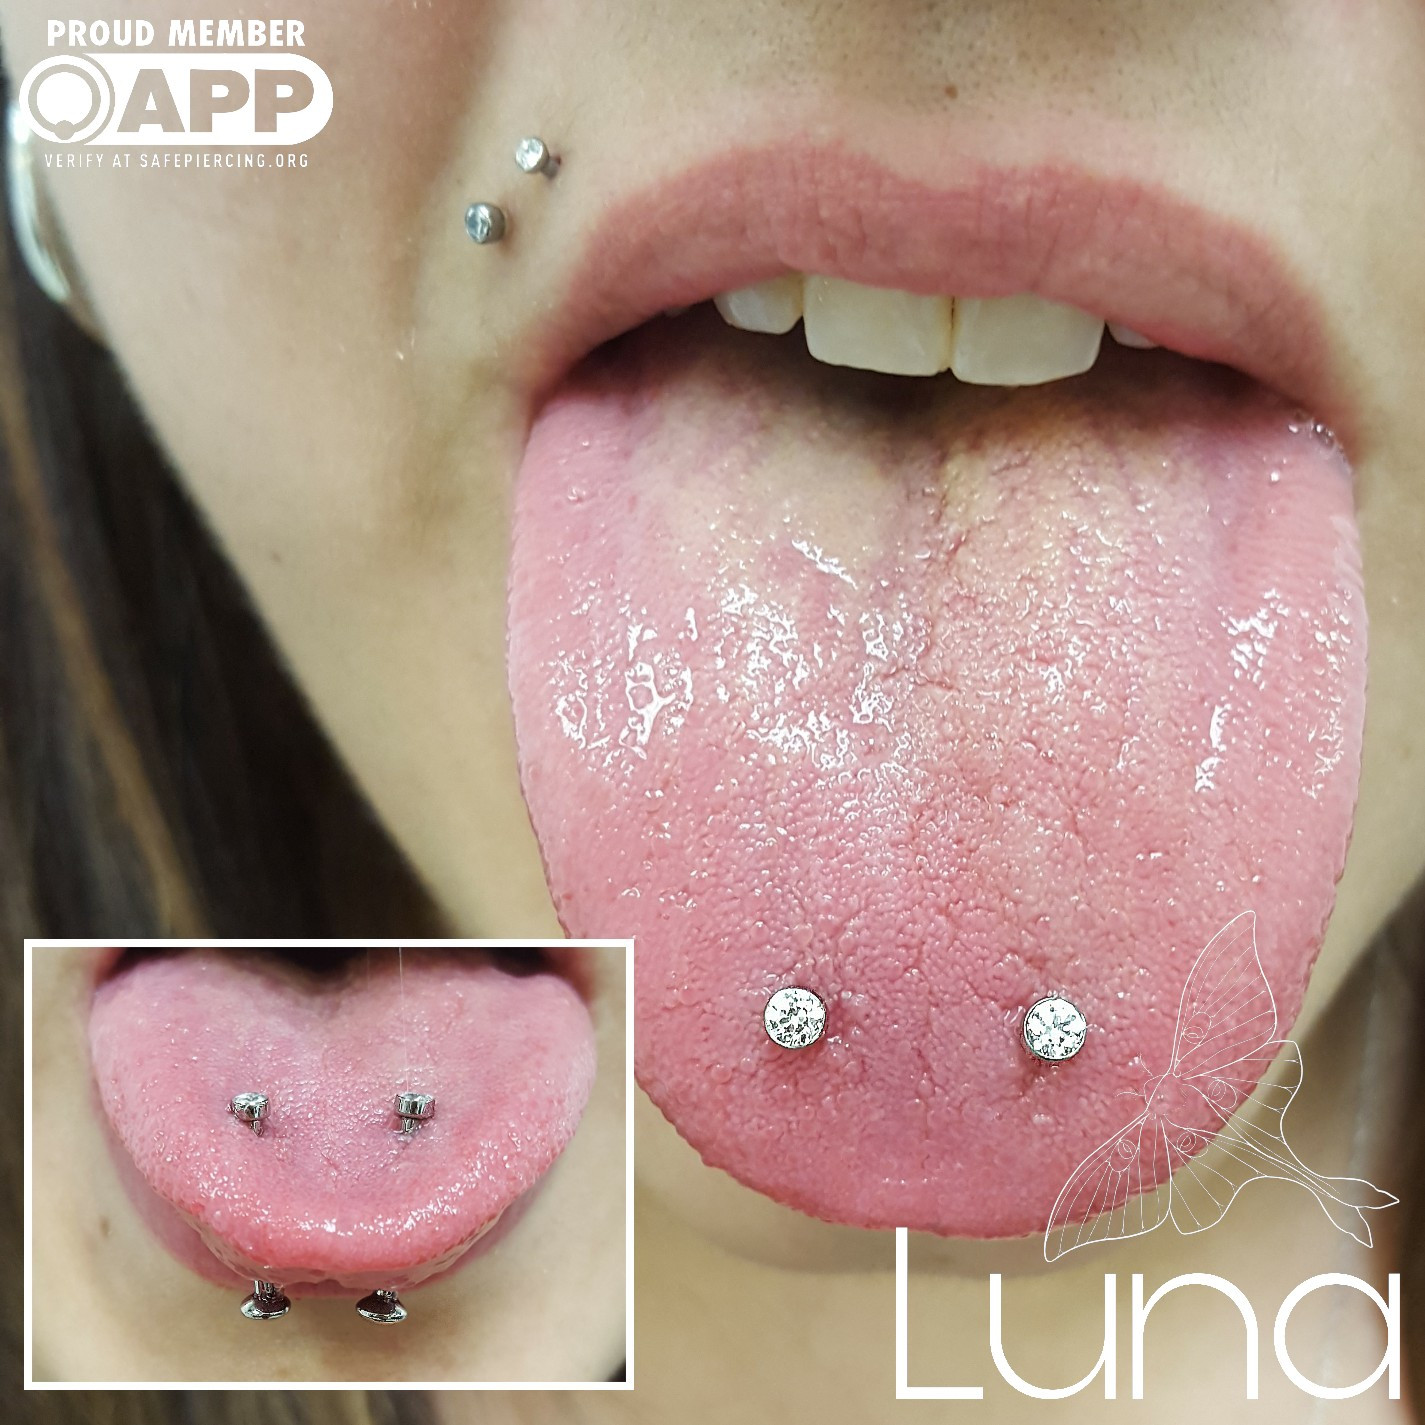 carl colgan recommends double tongue piercing tip pic